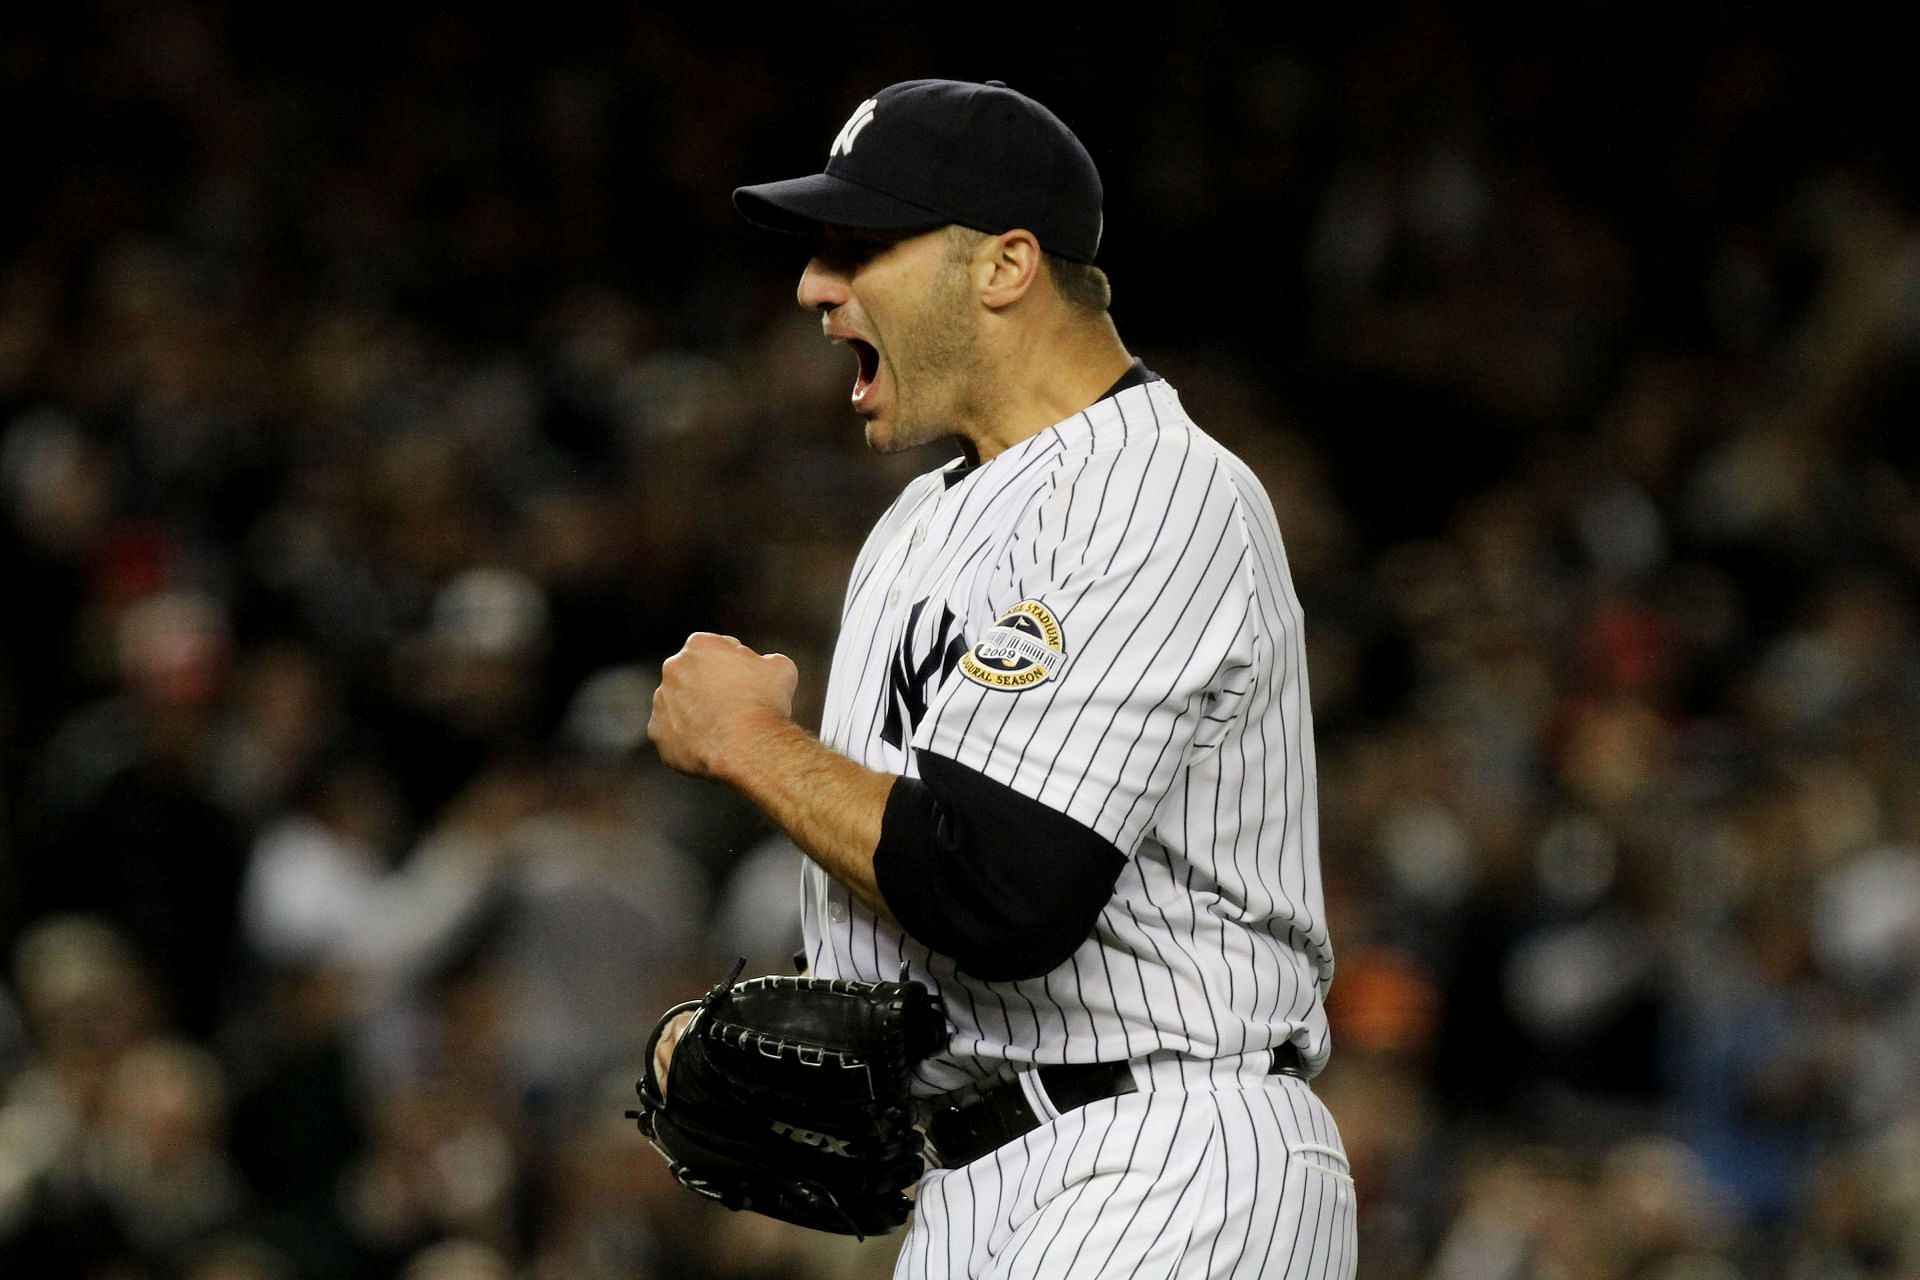 Andy Pettitte #46 of the New York Yankees celebrates the end of the top of the sixth inning of Game Six of the ALCS against the Los Angeles Angels of Anaheim during the 2009 MLB Playoffs at Yankee Stadium on October 25, 2009 in New York, New York. (Photo by Al Bello/Getty Images)